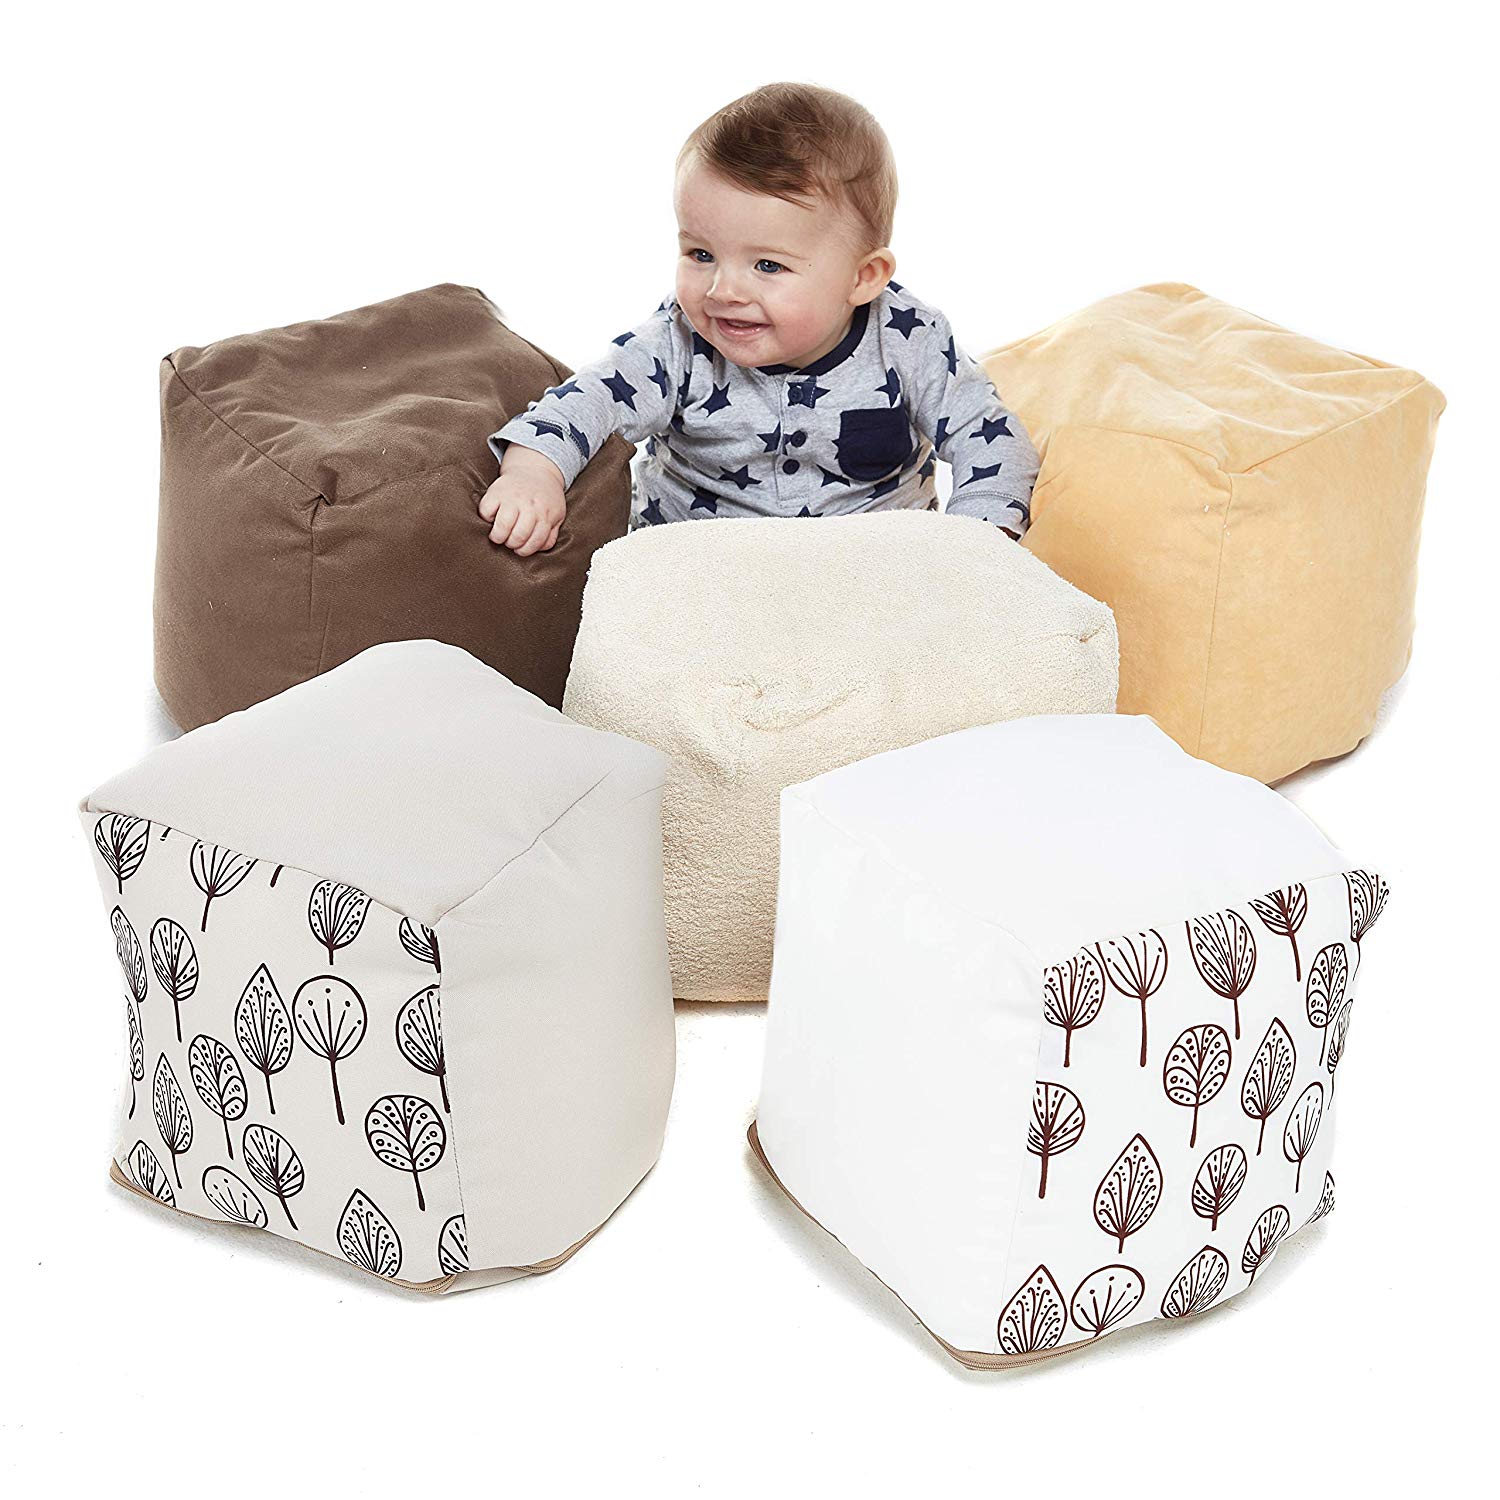 Natural Sensory Cubes 5 Pack, Each Natural sensory cube is different creating a tactile exploration area that babies and young children will love, the Natural sensory cubes are a unique and stylish addition to any early years setting. The Natural Sensory Cubes are a set of 5 small cubes designed for babies and small children. In a range of natural fabrics they are perfect for sensory activities. Great fun for patting, squashing and rolling. Set includes 5 Sensory Cubes. Suitable from Birth, Natural Sensory 